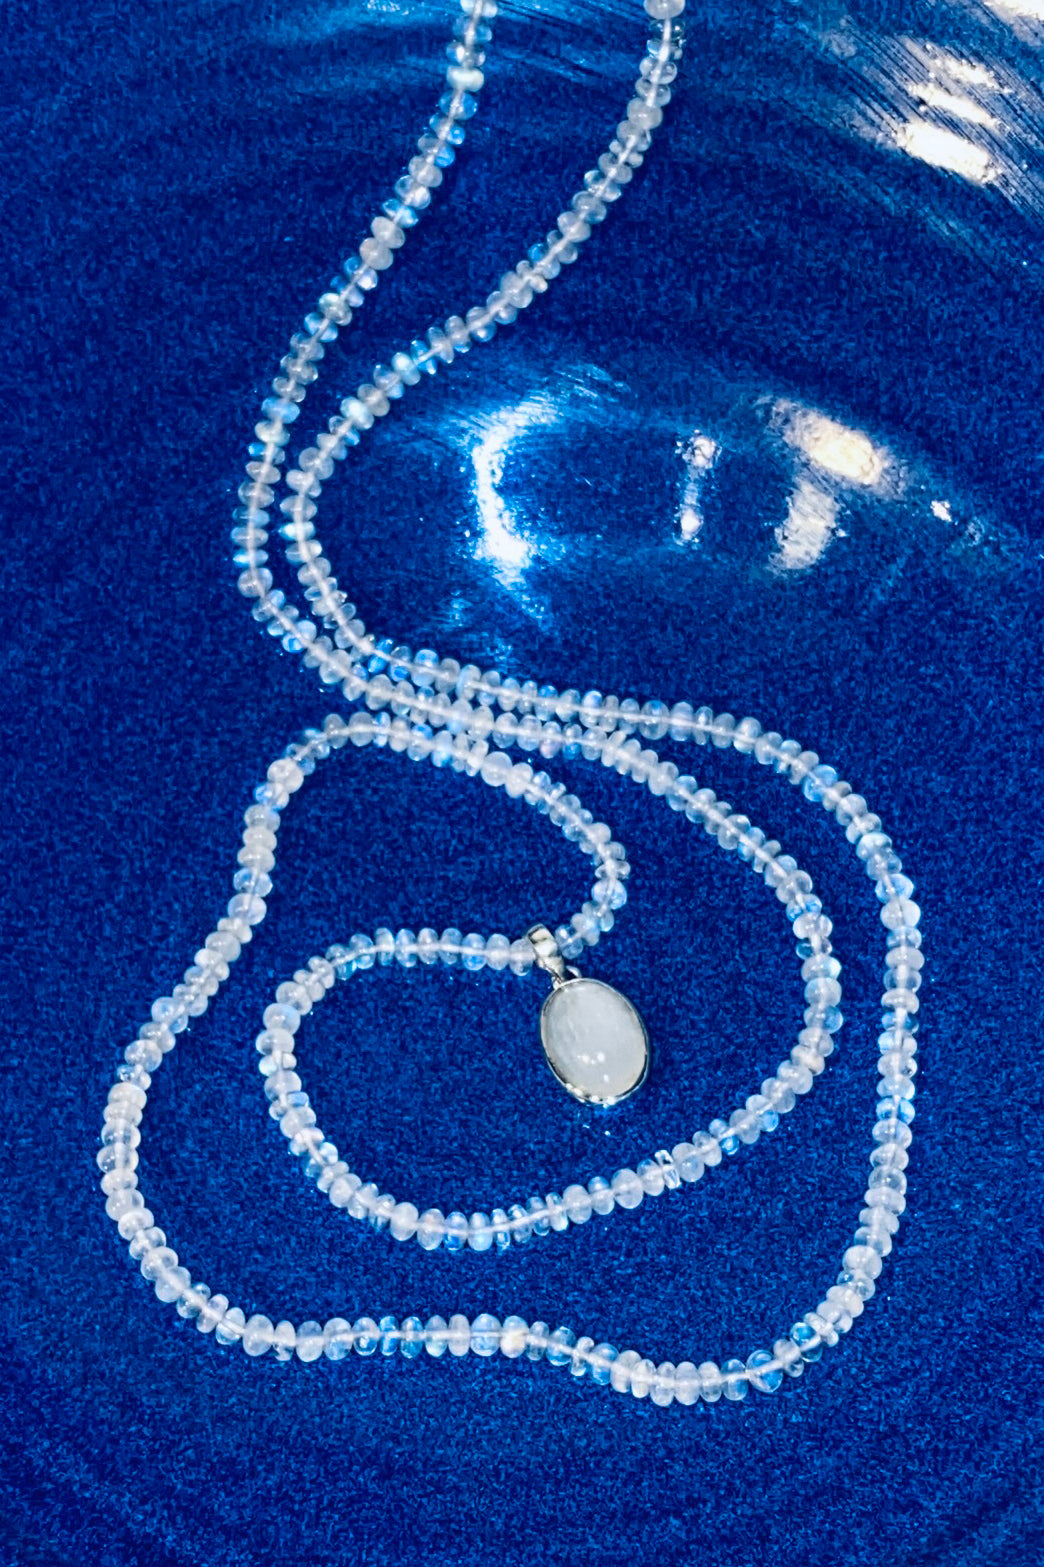 Moonstone Necklace with Pendant